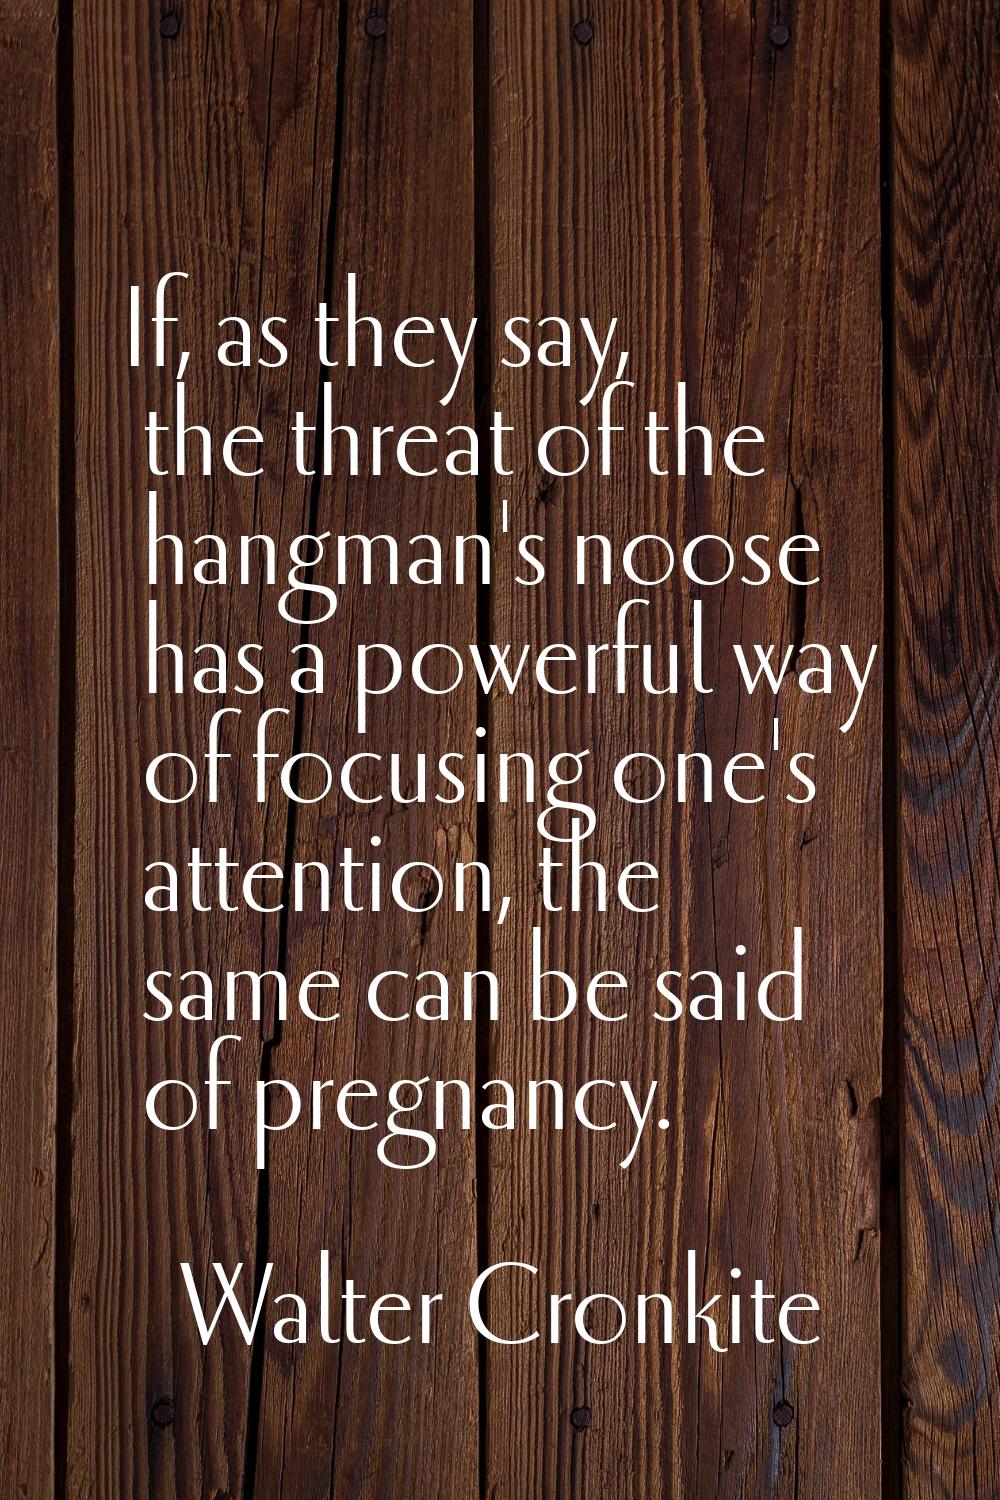 If, as they say, the threat of the hangman's noose has a powerful way of focusing one's attention, 